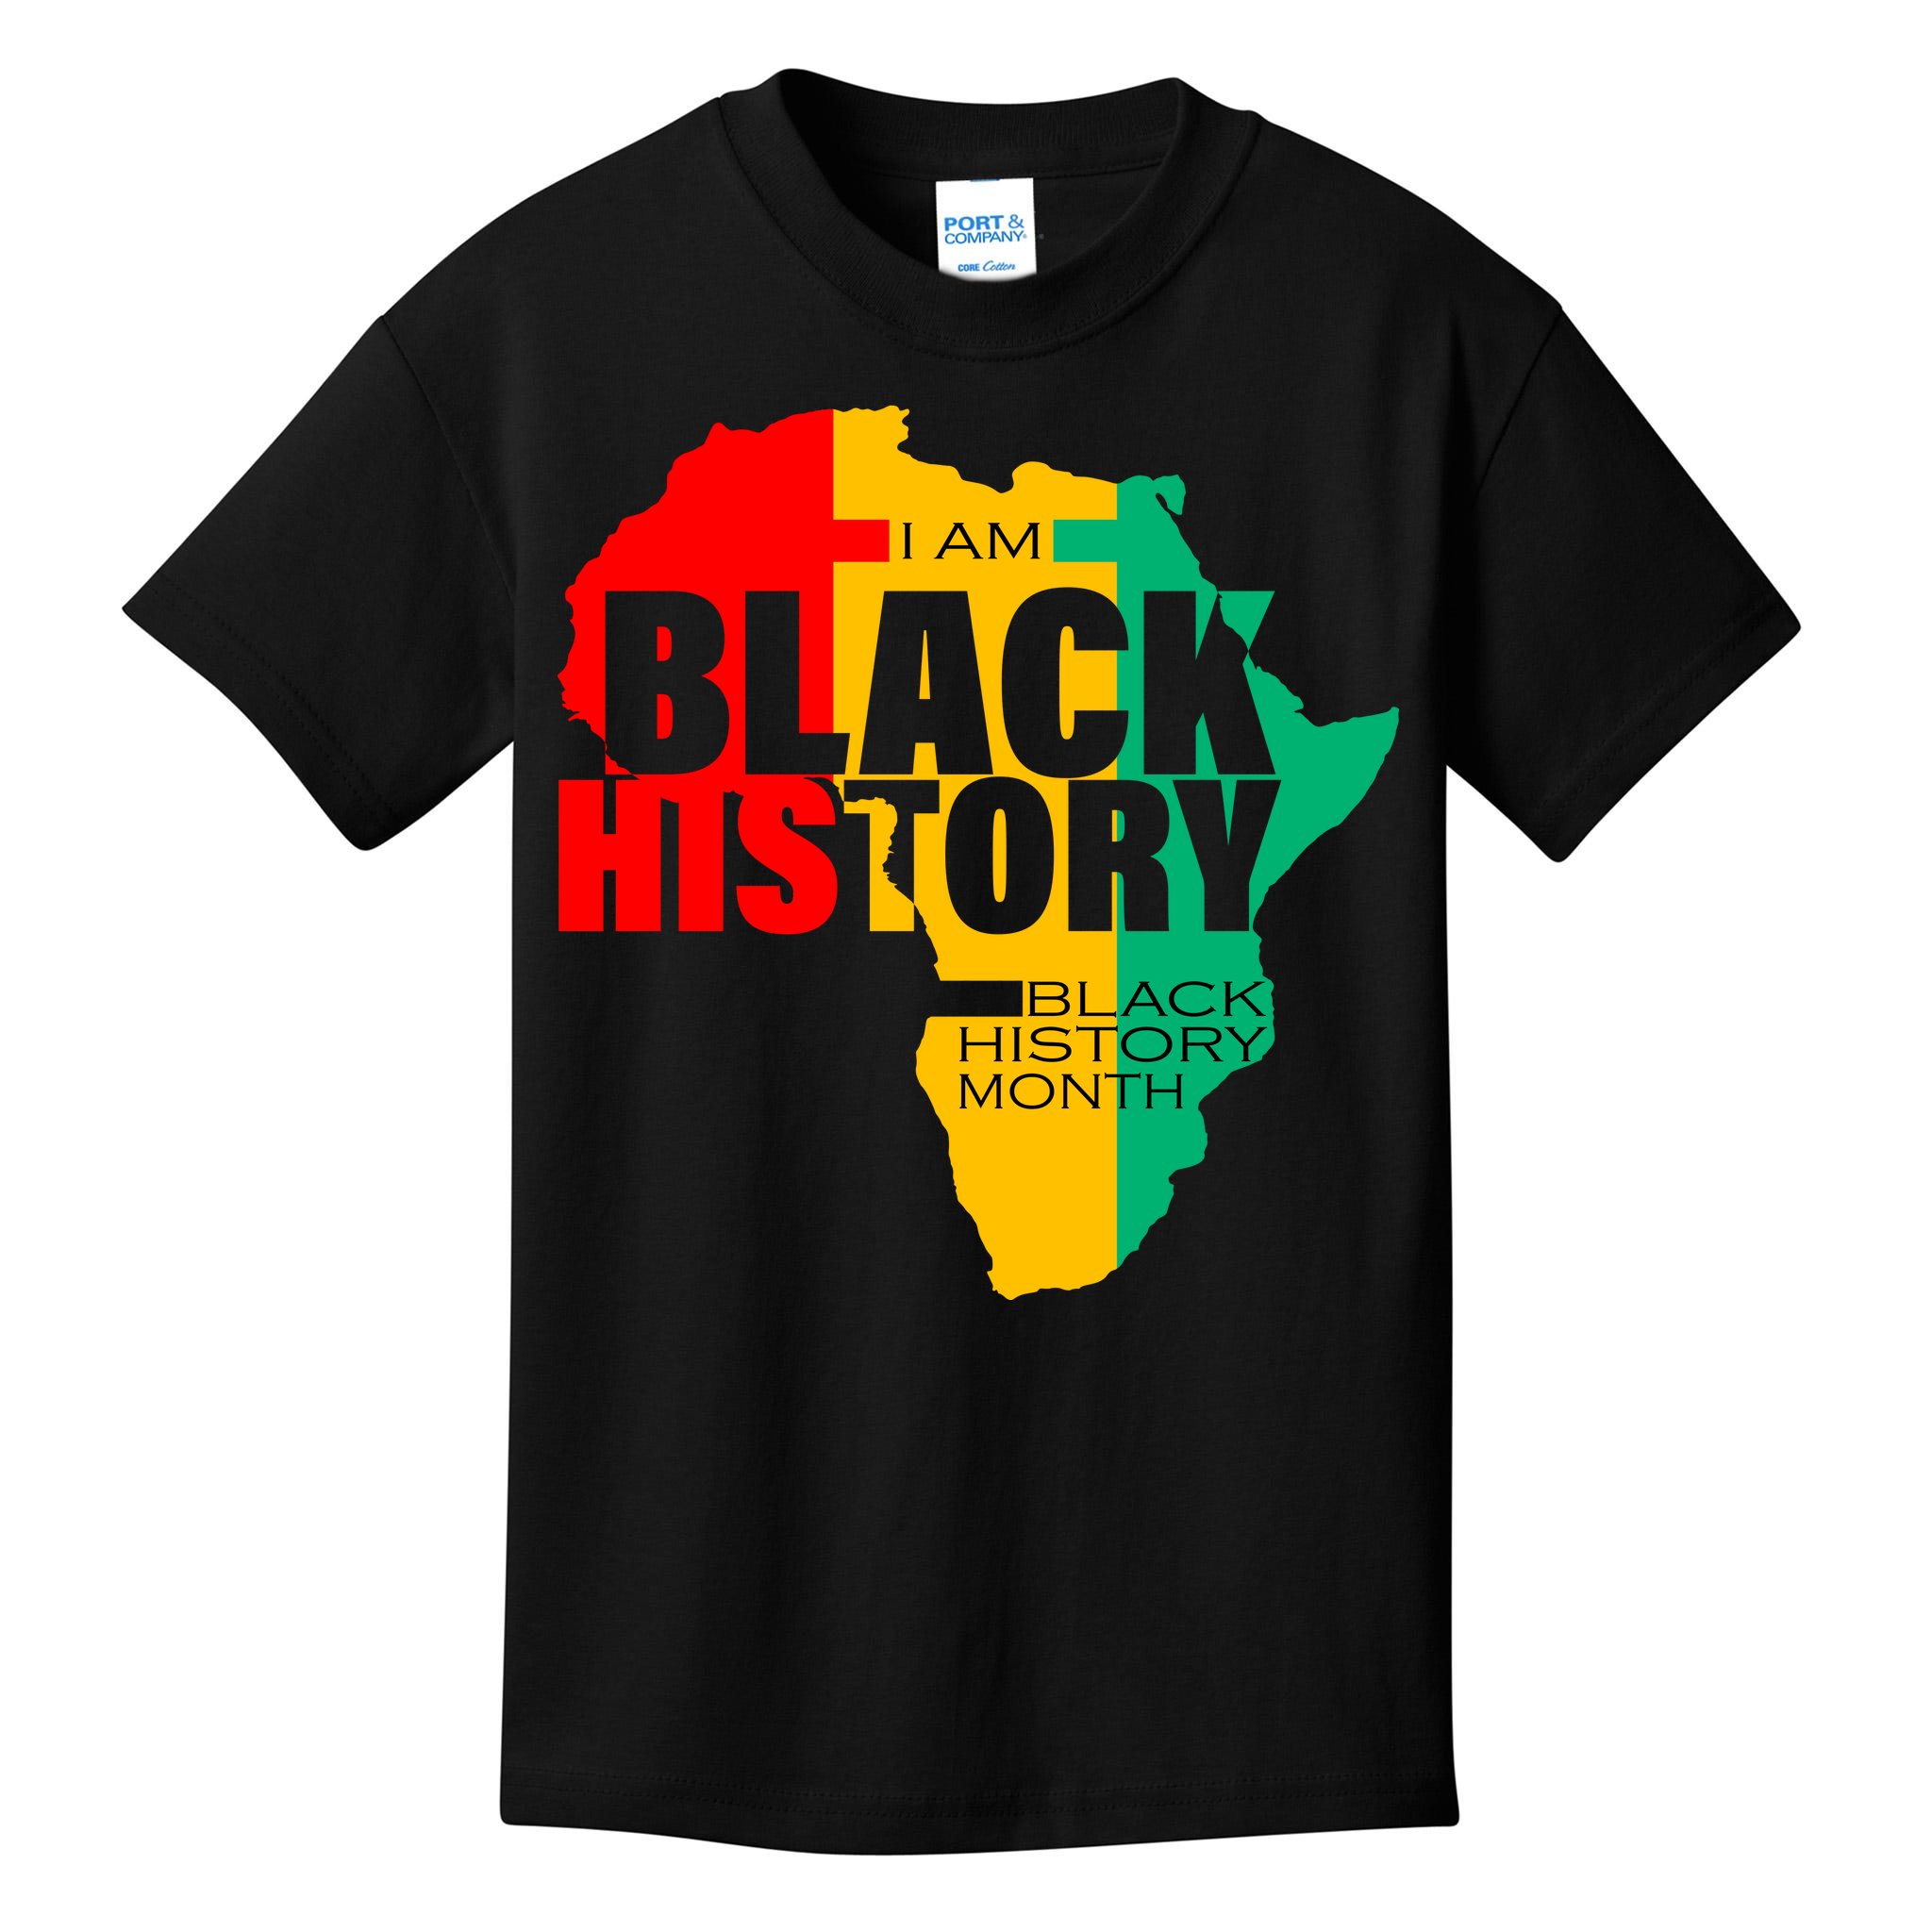 Black History Month T-shirt Map of Africa Black Pride Shirt I am Africa Map Tee